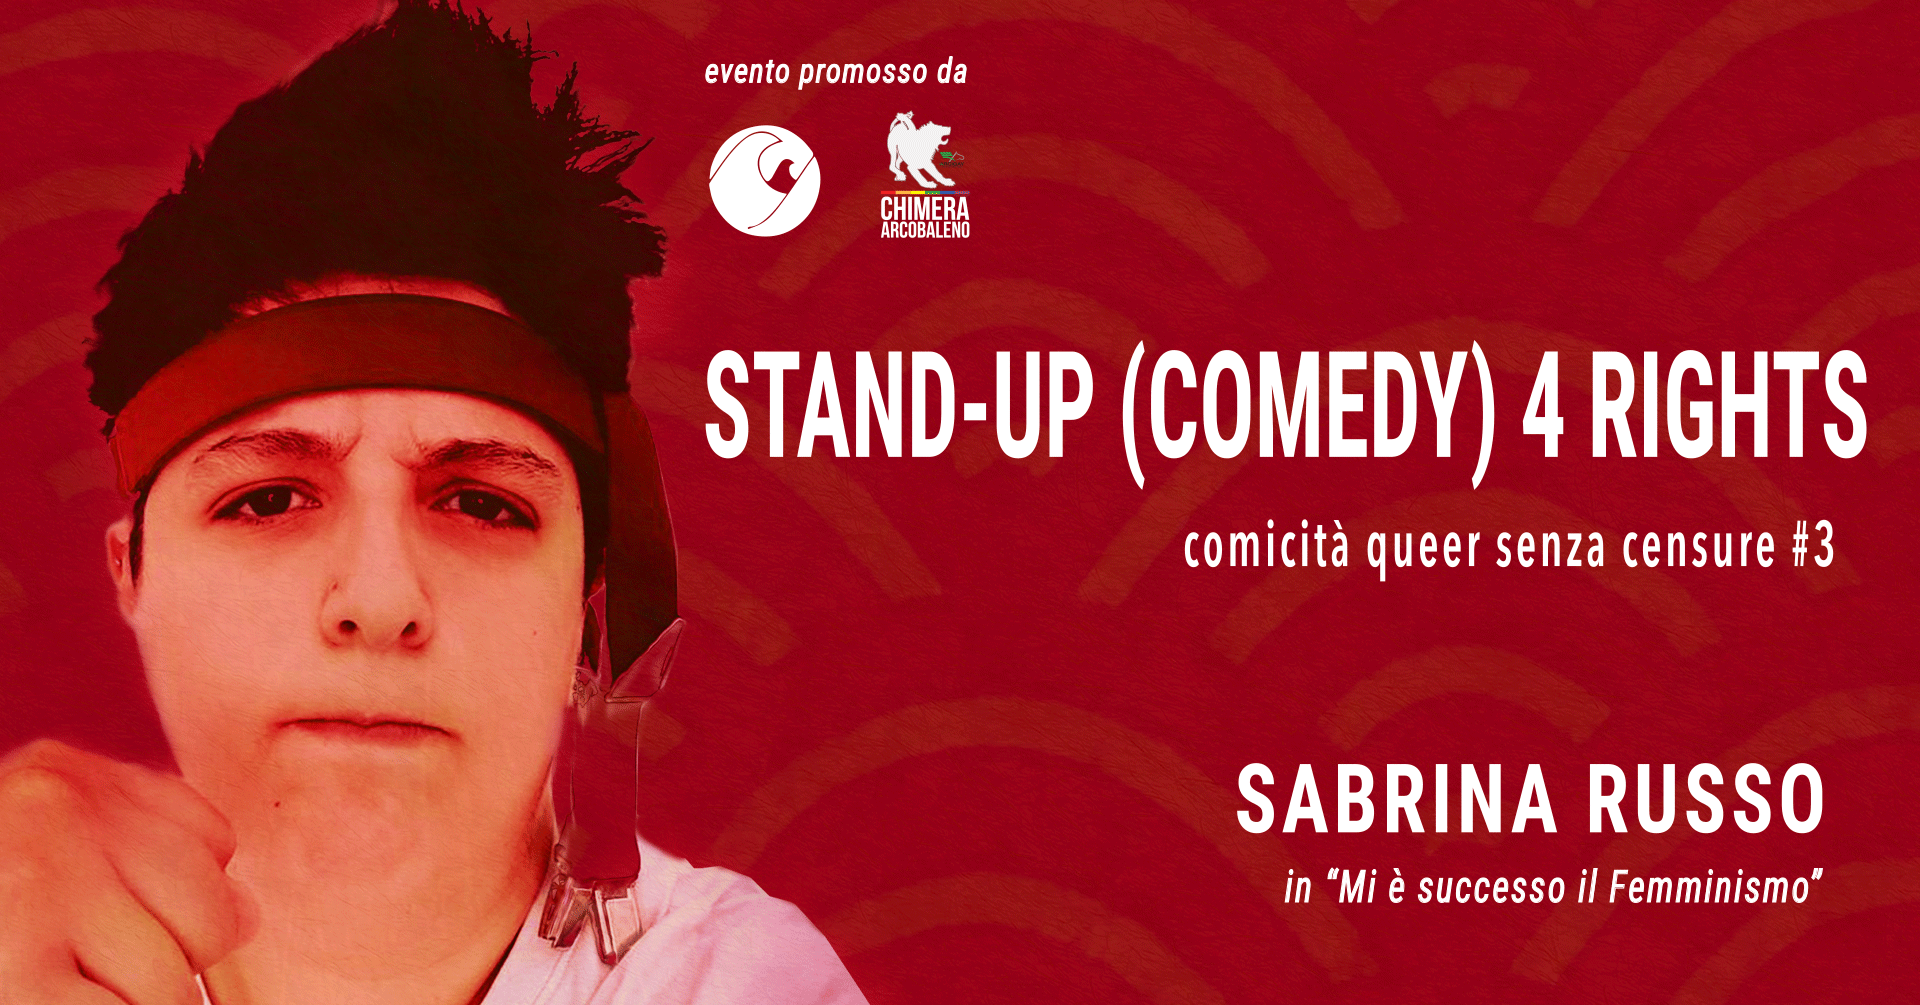 STAND-UP (comedy) 4 RIGHTS #3 con SABRINA SABBRA RUSSO